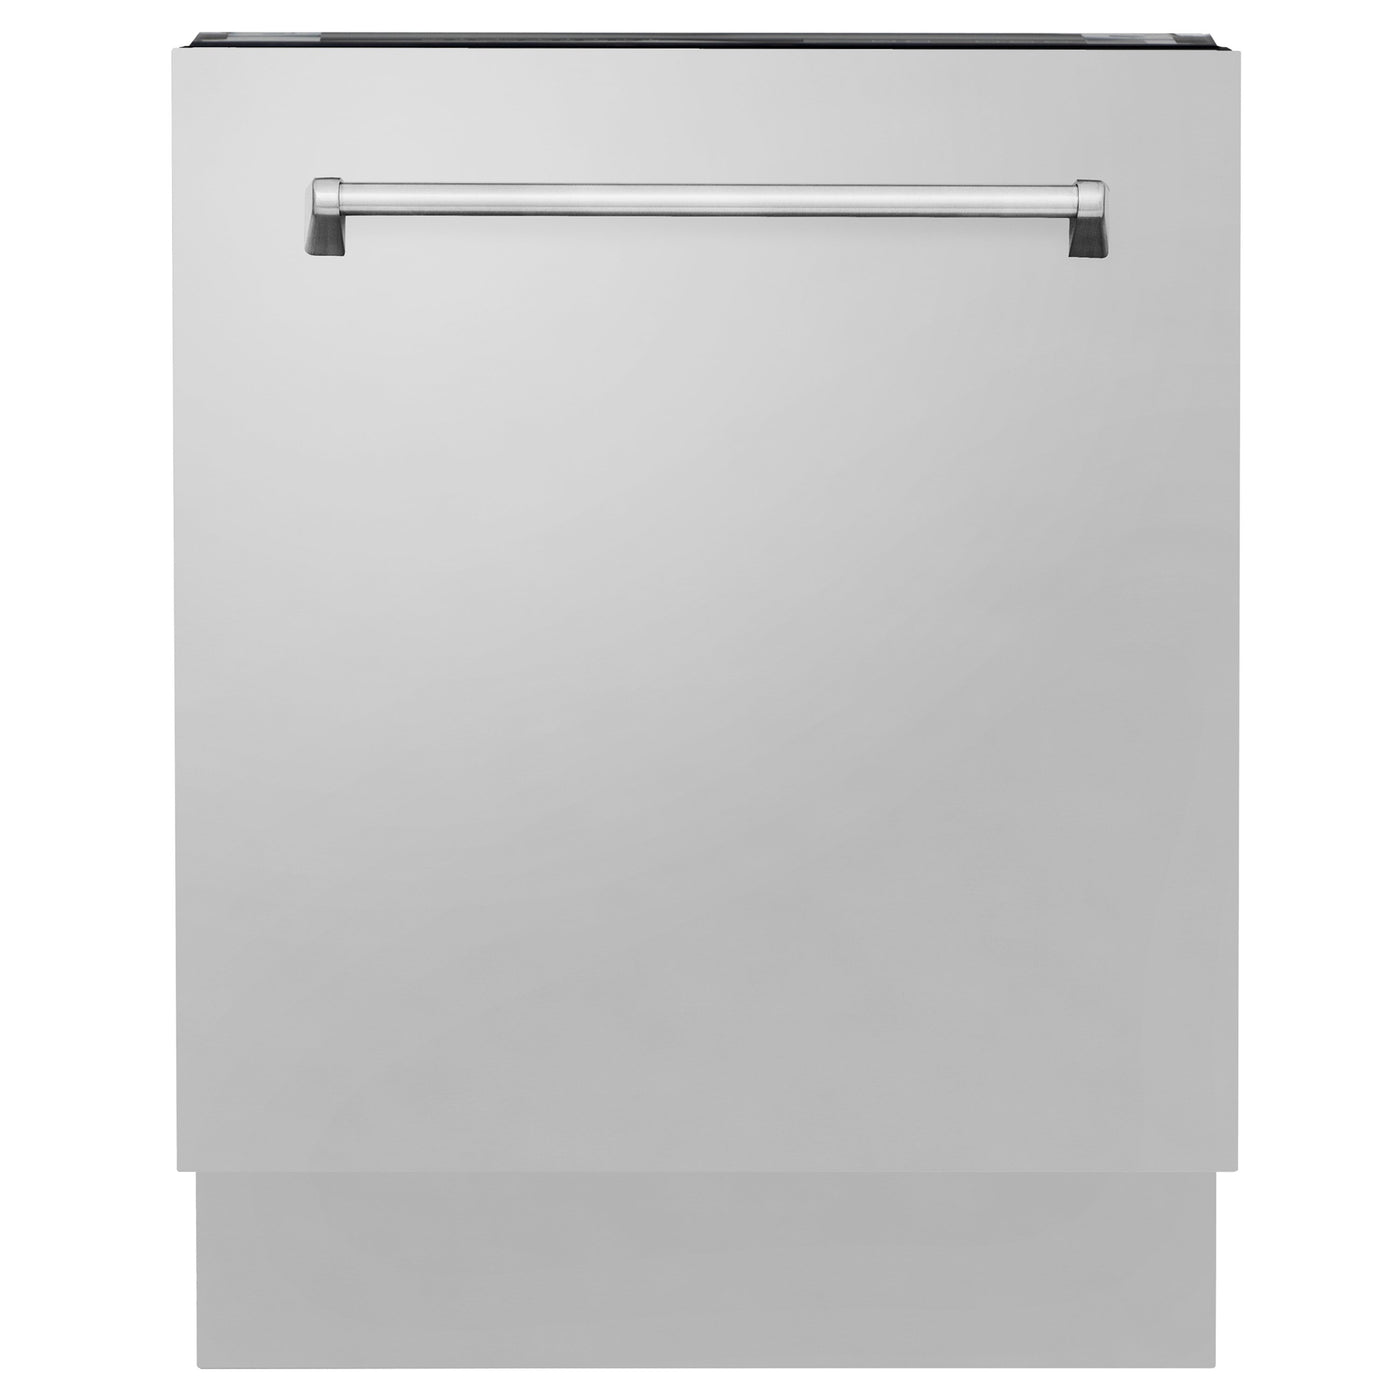 ZLINE 24" Tallac Series 3rd Rack Dishwasher with Traditional Handle, 51dBa (DWV-24)